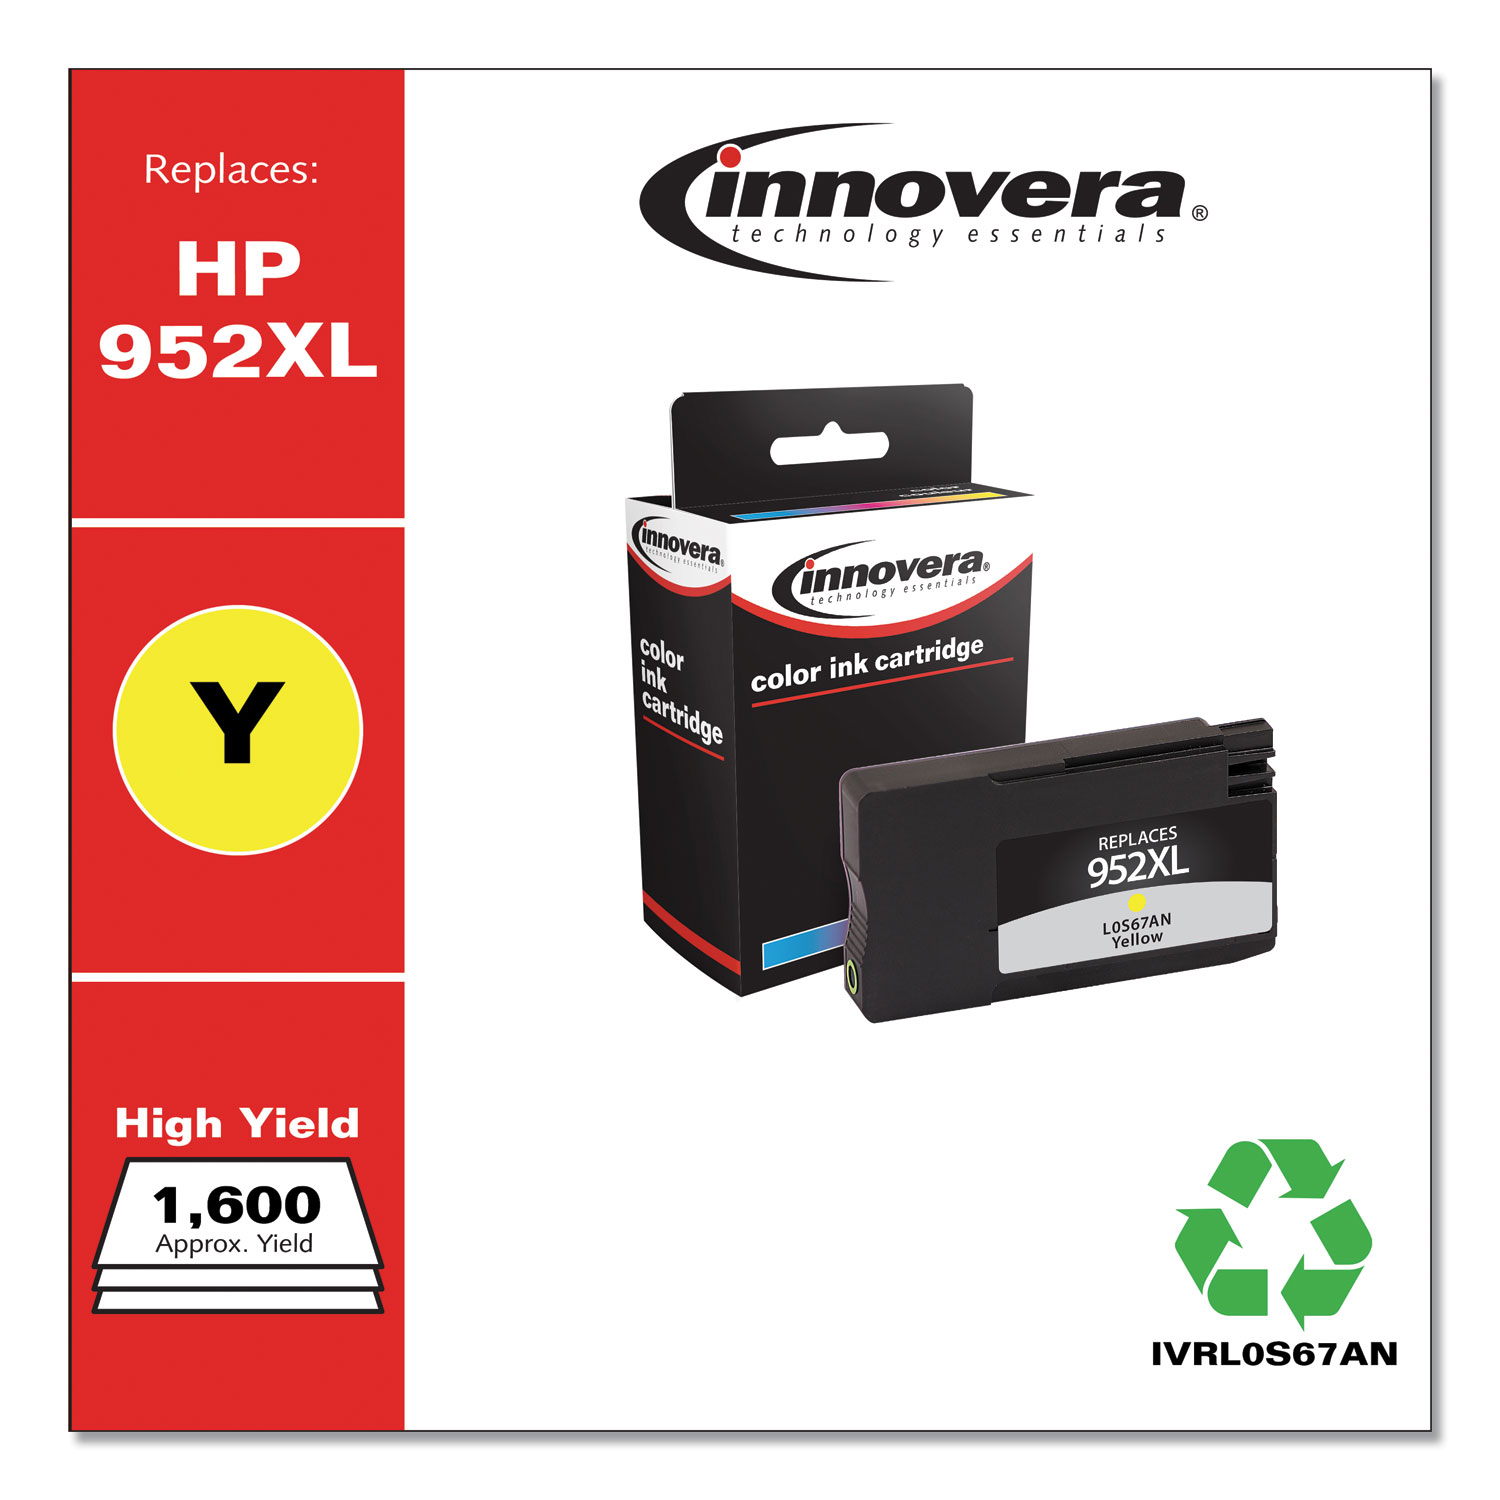  Innovera IVRL0S67AN Remanufactured Yellow High-Yield Ink, Replacement for HP 952XL (L0S67AN), 1,600 Page-Yield (IVRL0S67AN) 